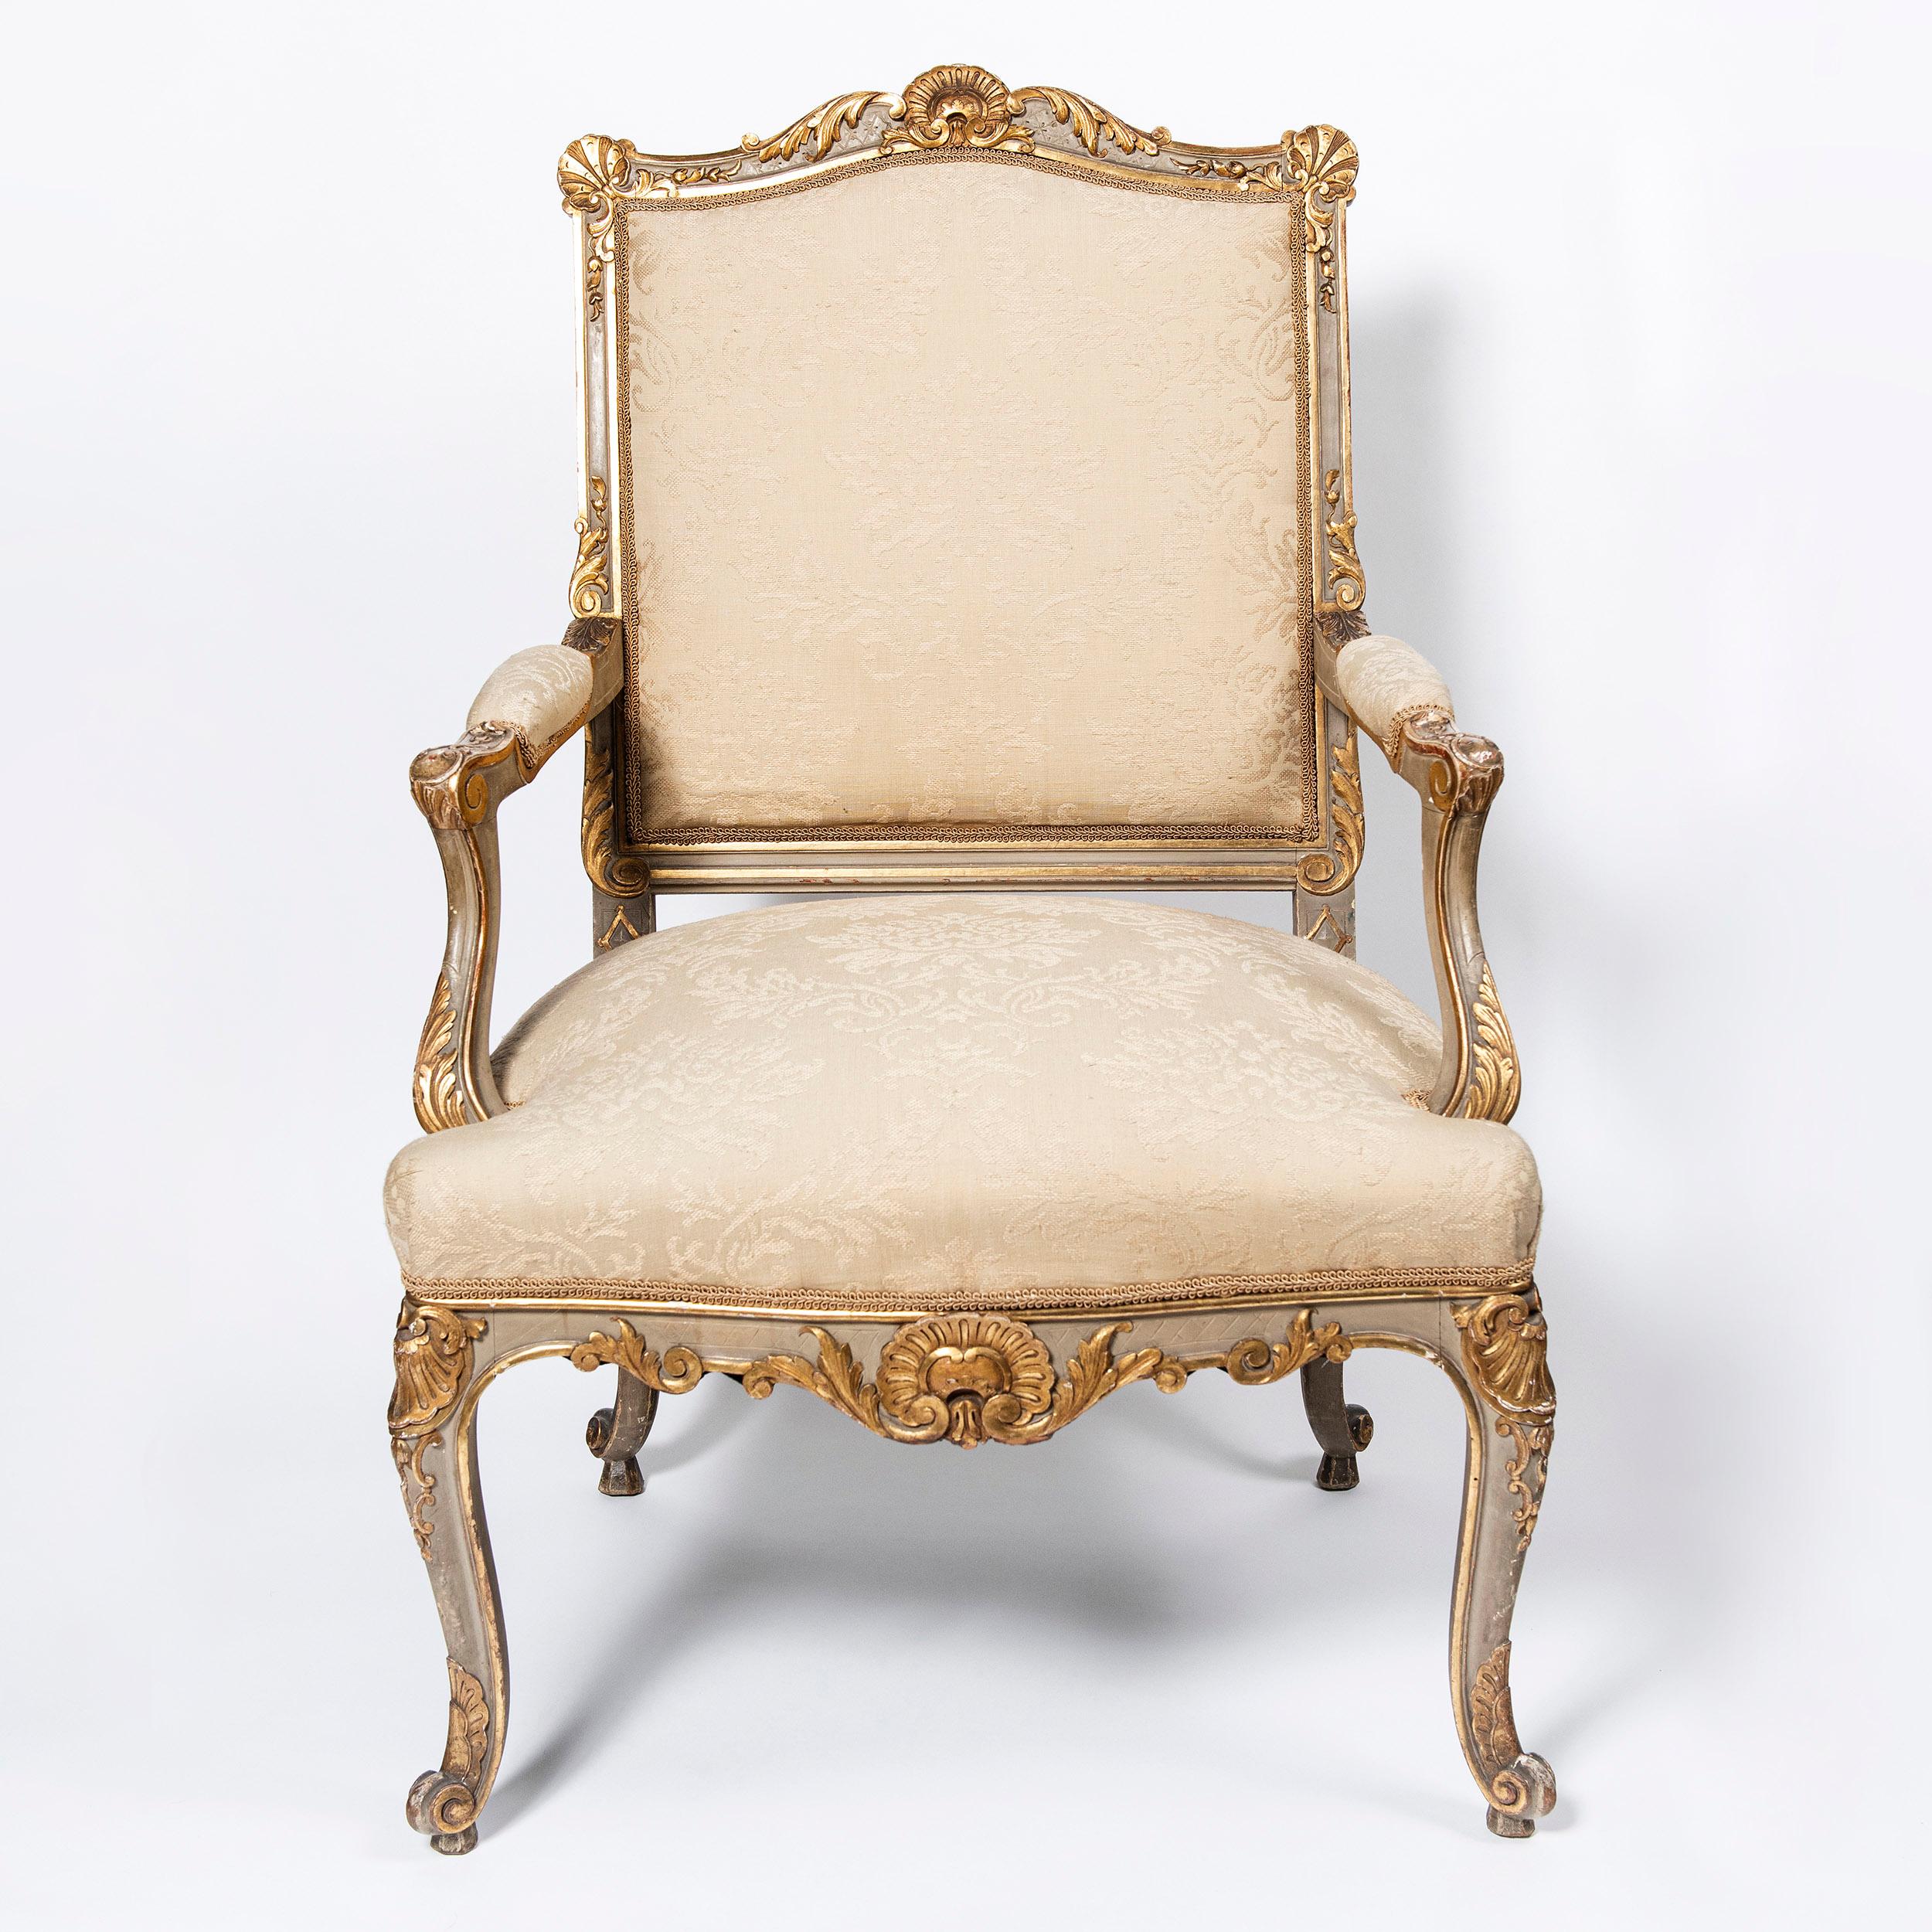 Pair of patinated wood and gold leaf armchairs by Maison Forest, France, late 19th century.